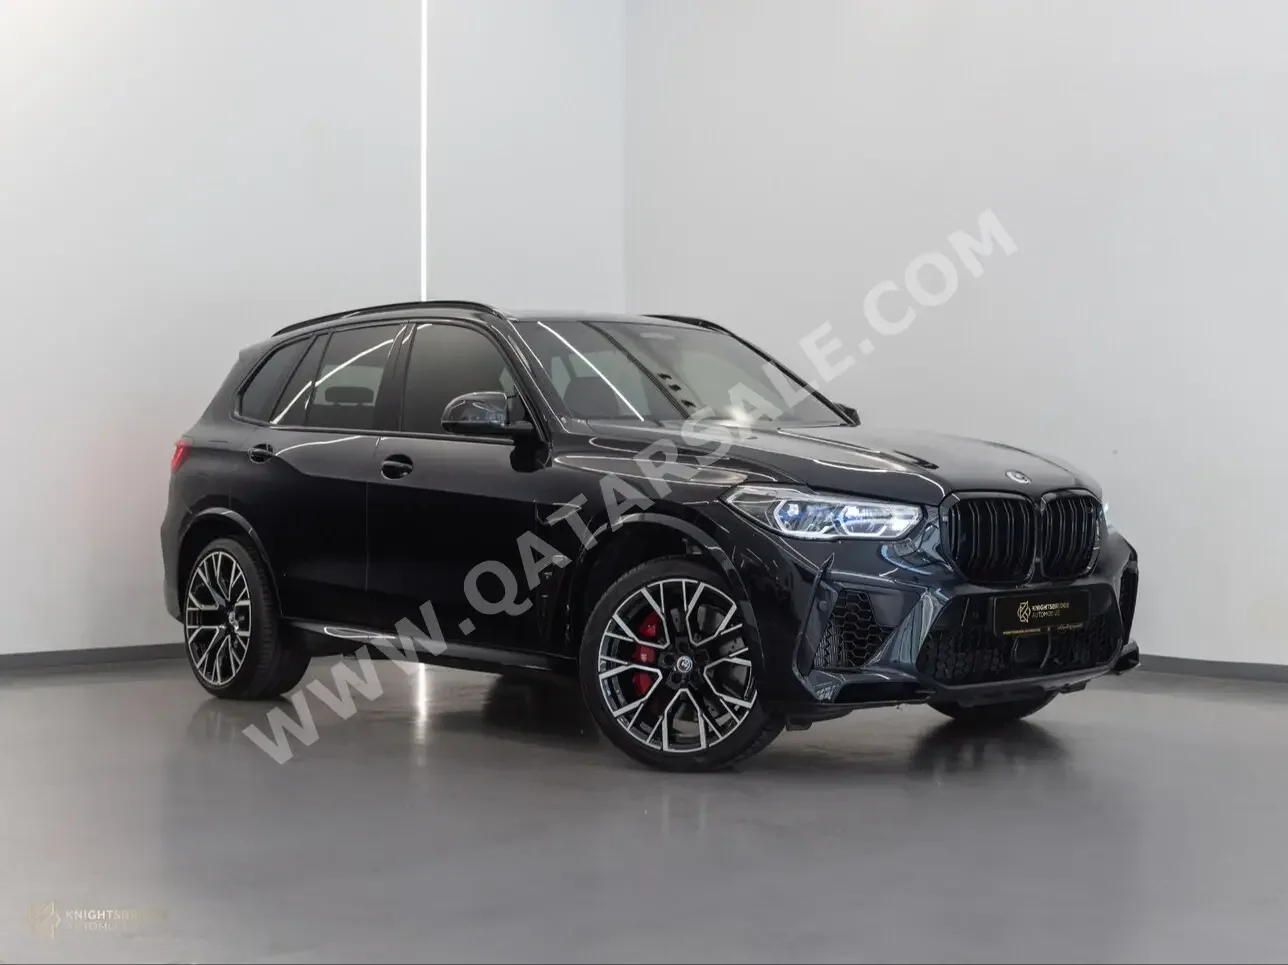 BMW  X-Series  X5 M Competition  2023  Automatic  18,650 Km  8 Cylinder  Four Wheel Drive (4WD)  SUV  Black  With Warranty